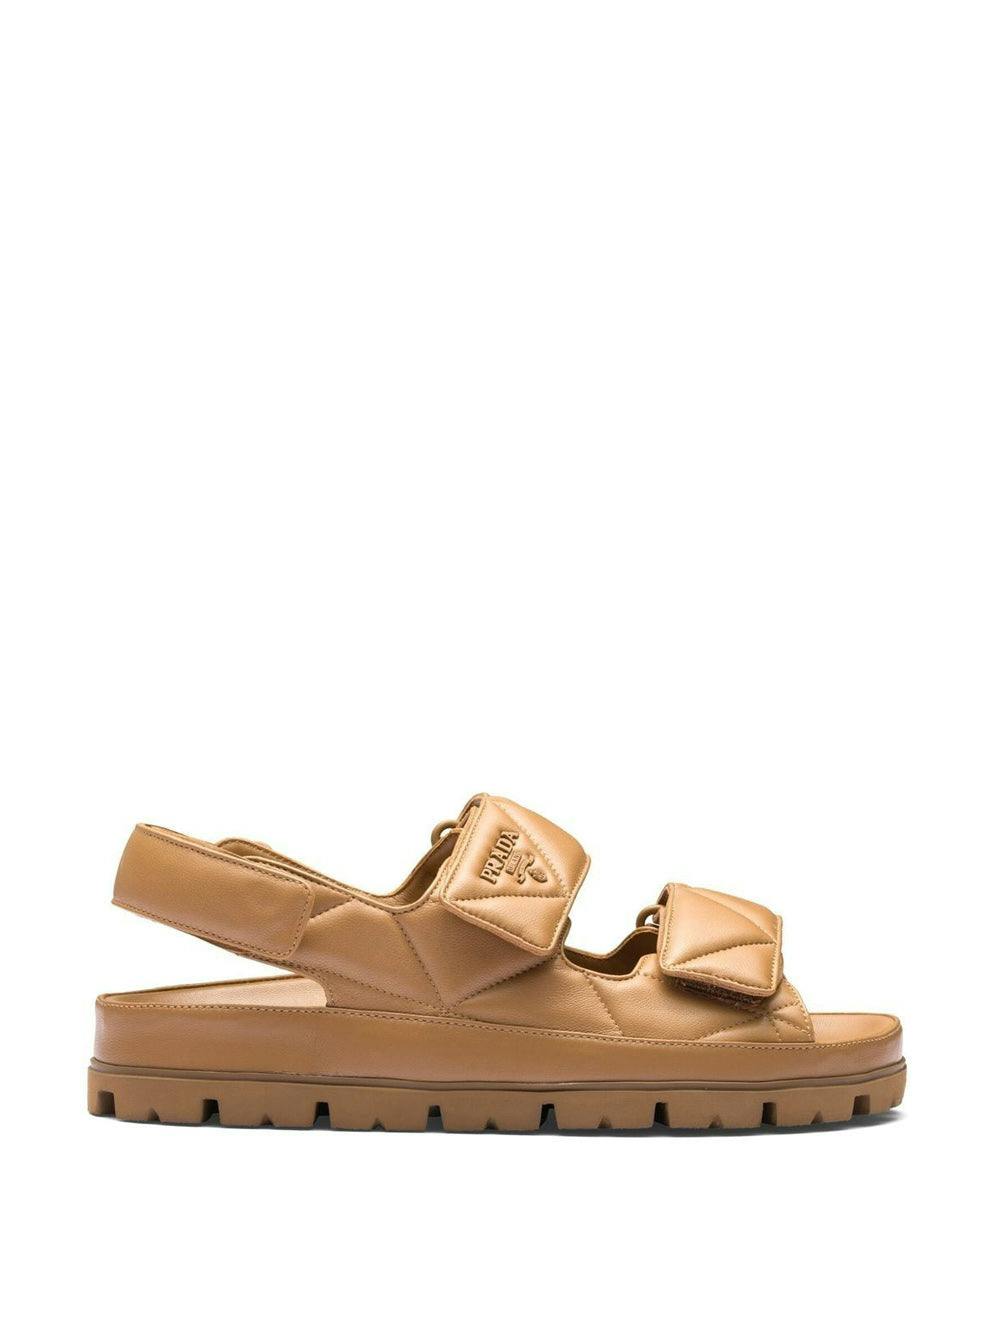 Padded leather sandals